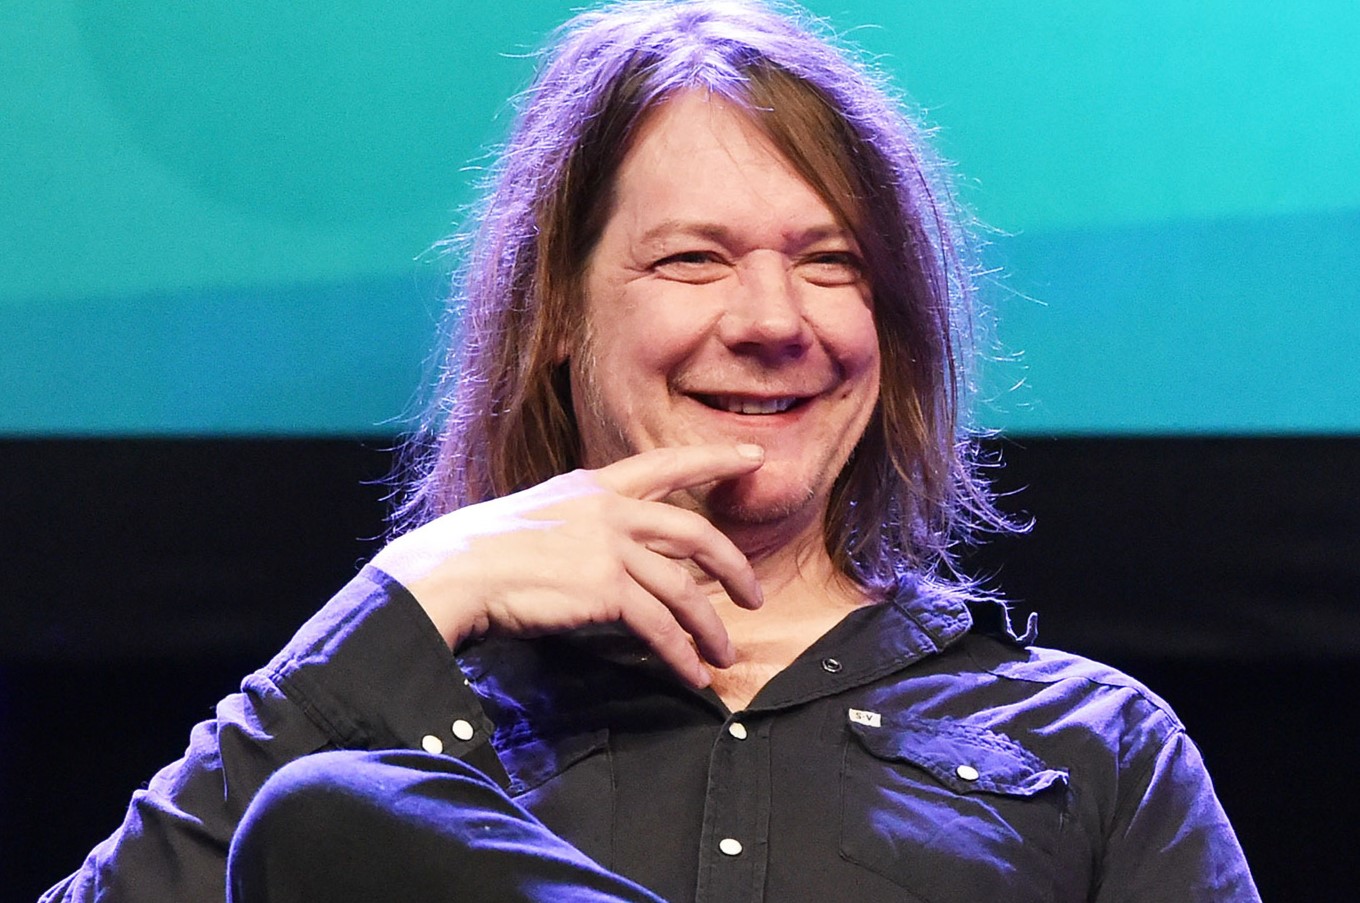 12 Captivating Facts About Dave Pirner - Facts.net